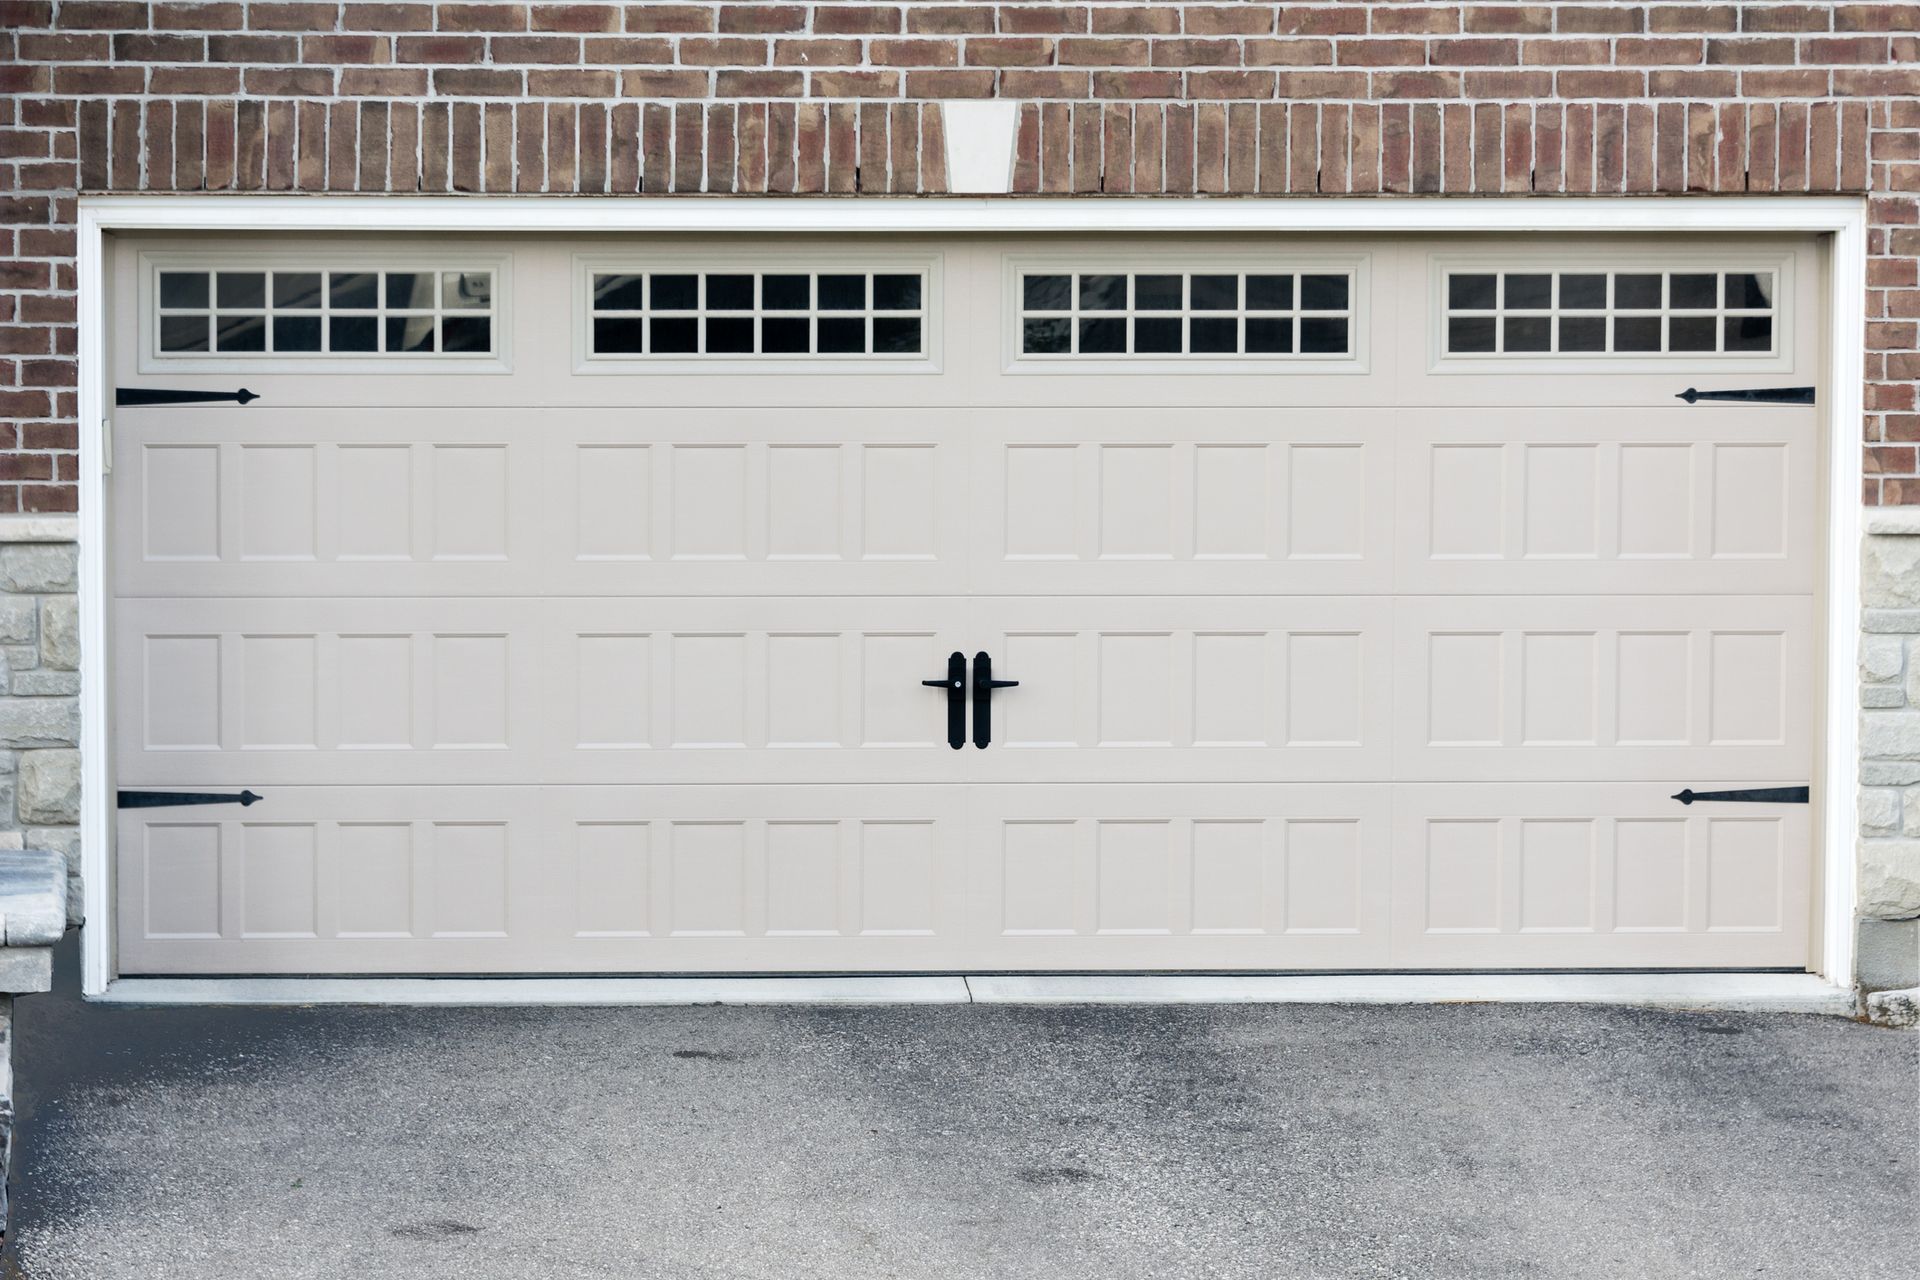 A white garage door is sitting in front of a brick building.